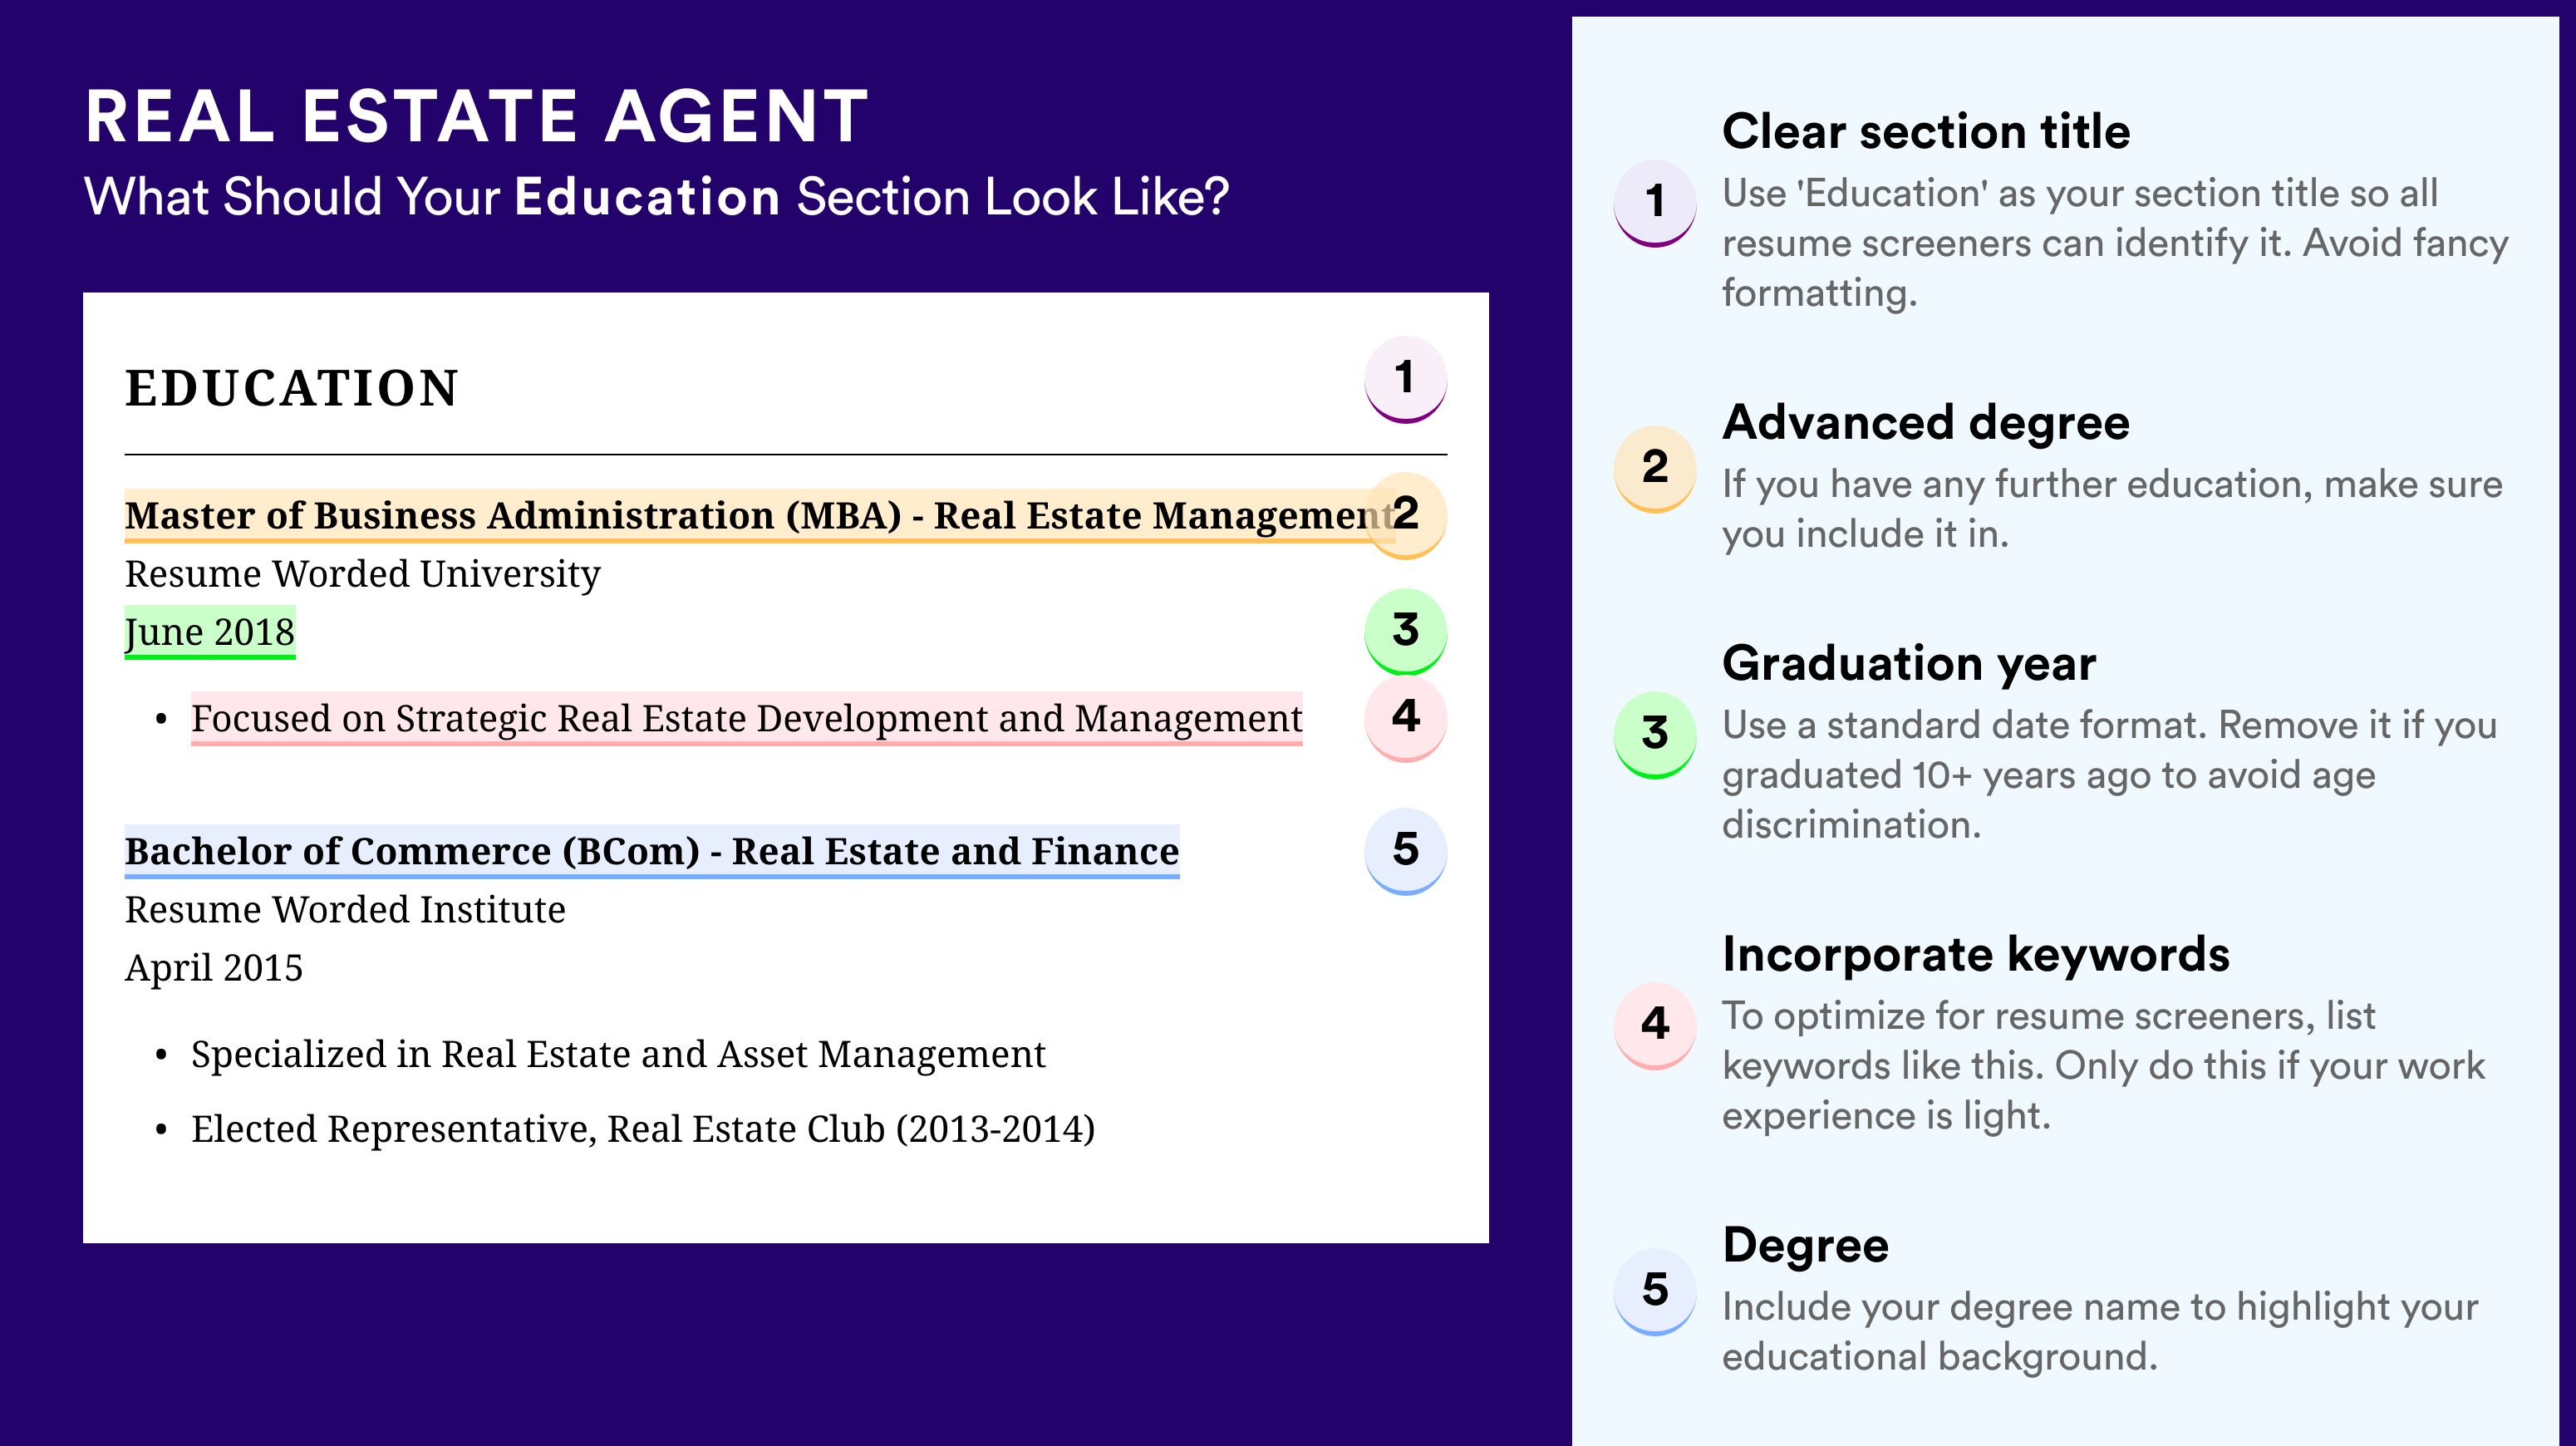 How To Write An Education Section - Real Estate Agent Roles